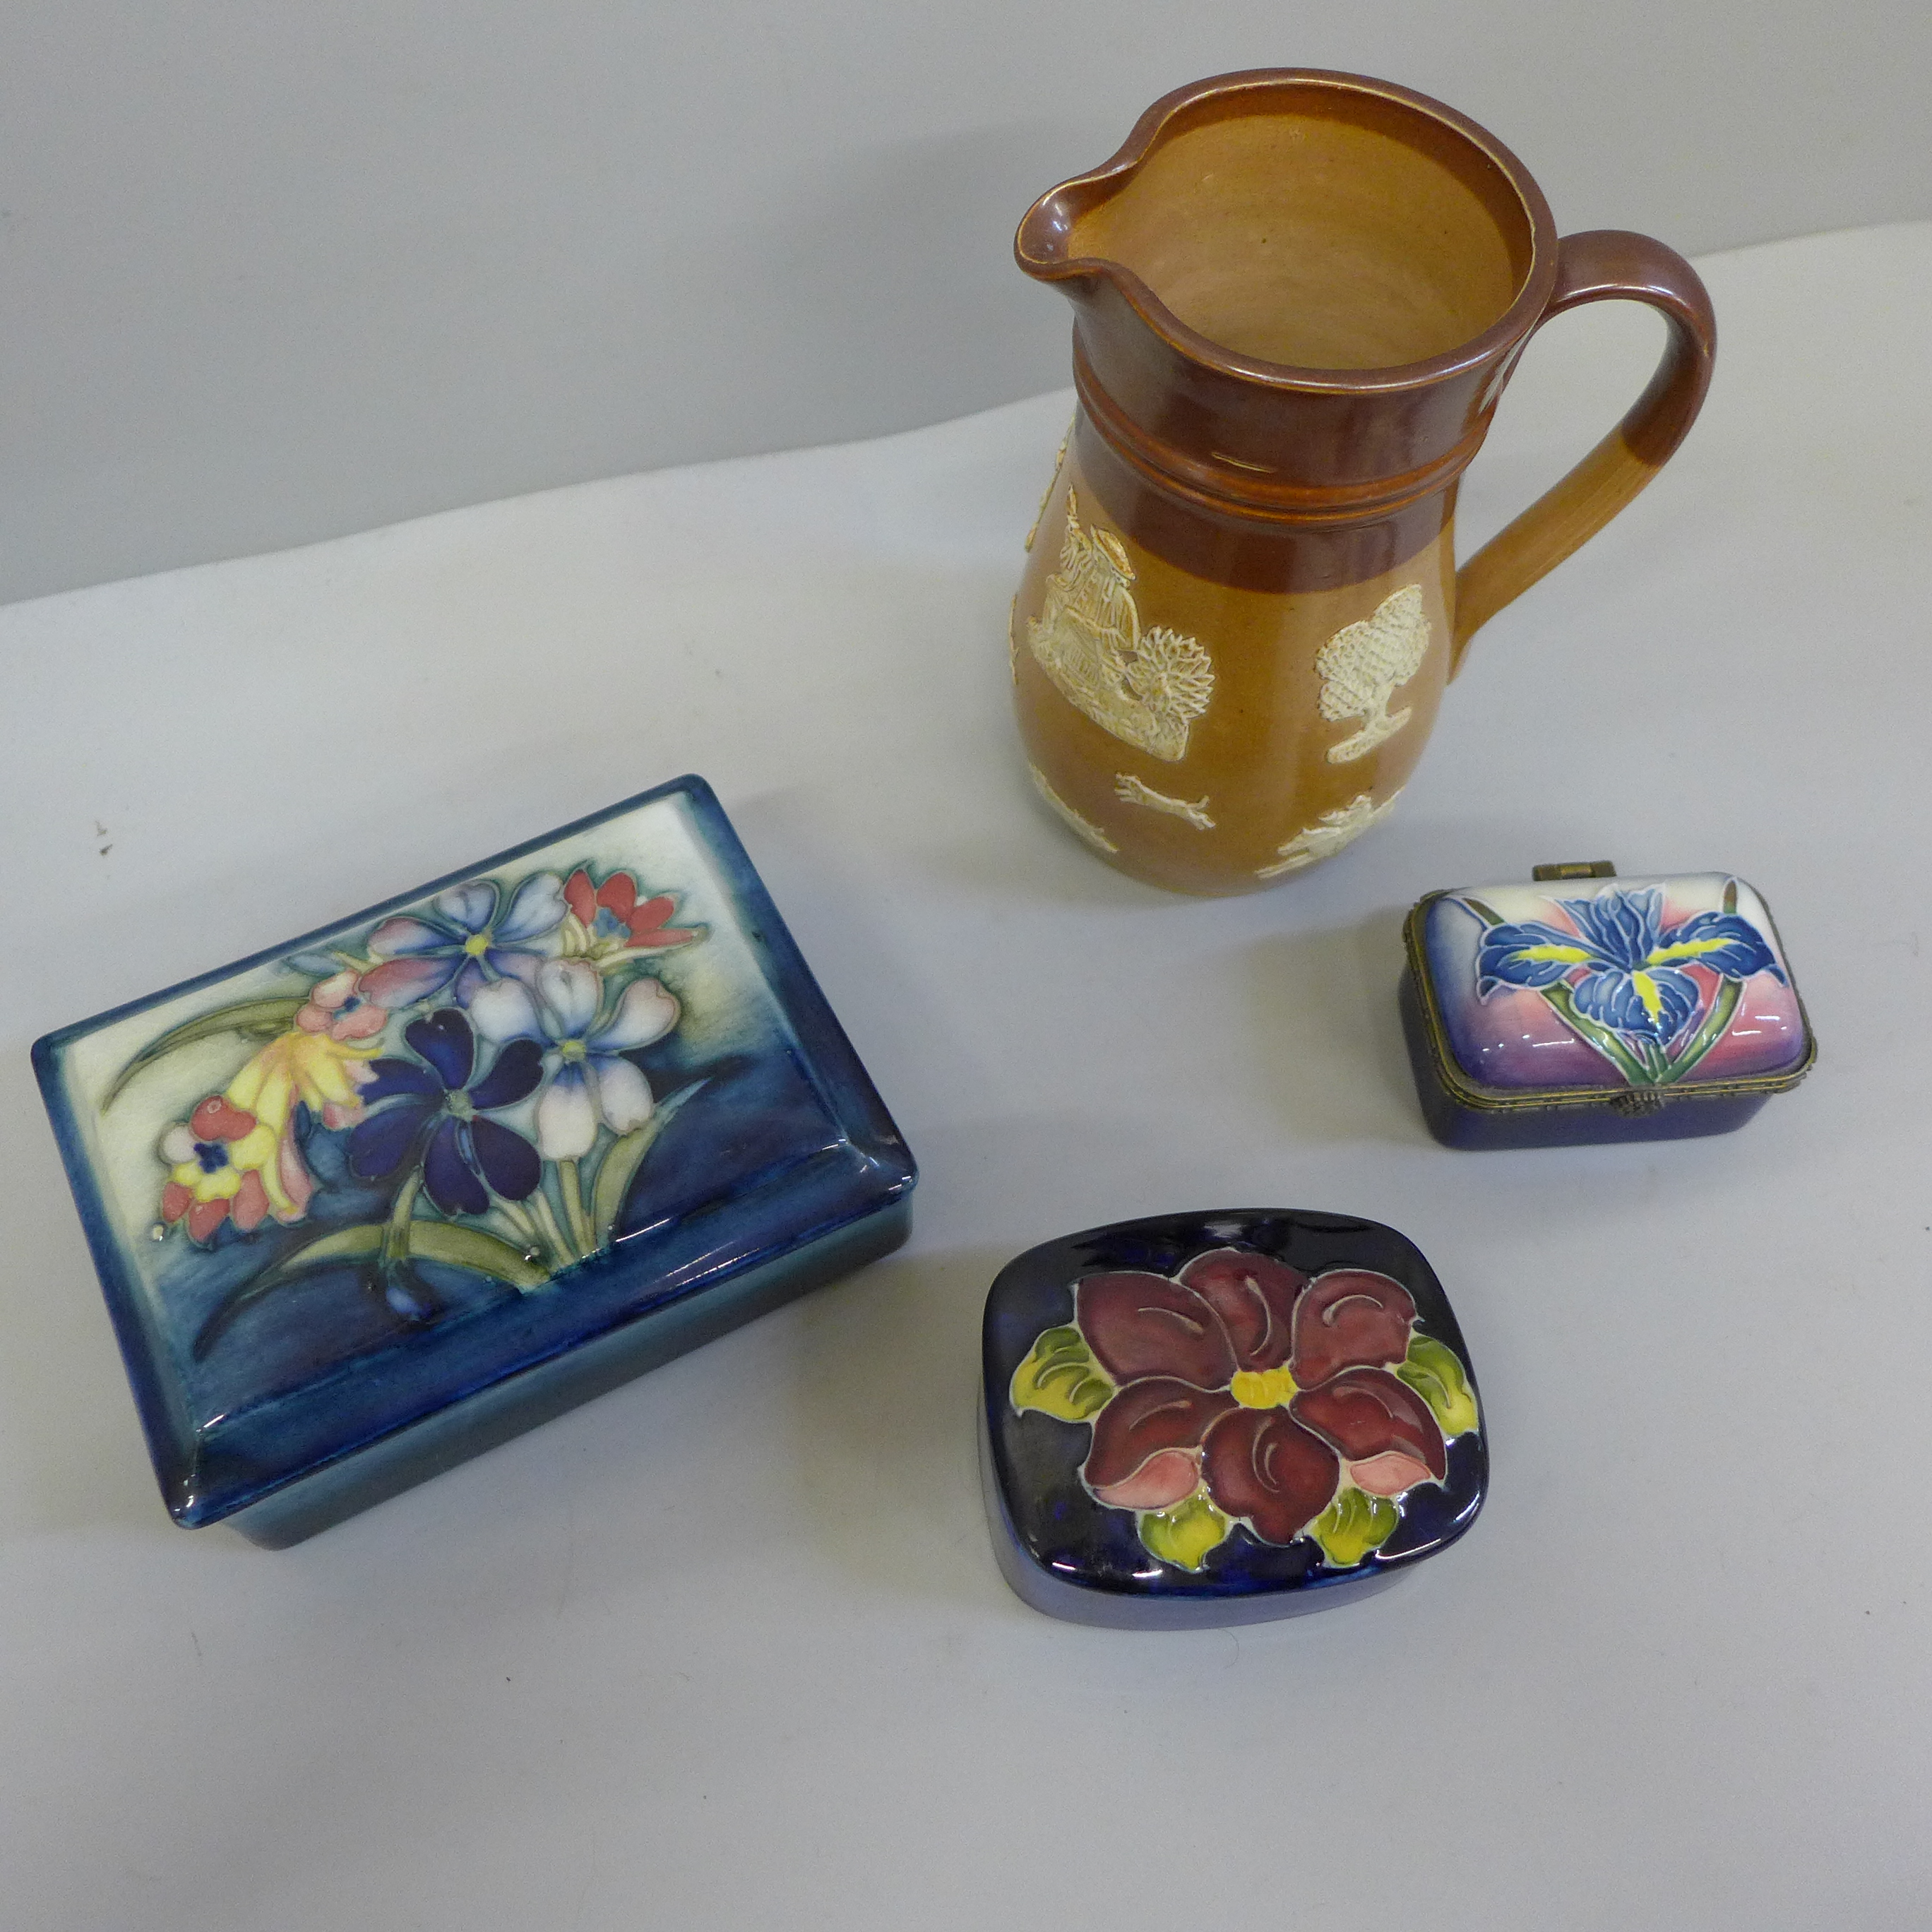 Two Moorcroft pots, the larger one signed W.Moorcroft, an Old Tupton ware pot, and a Royal Doulton - Image 2 of 3